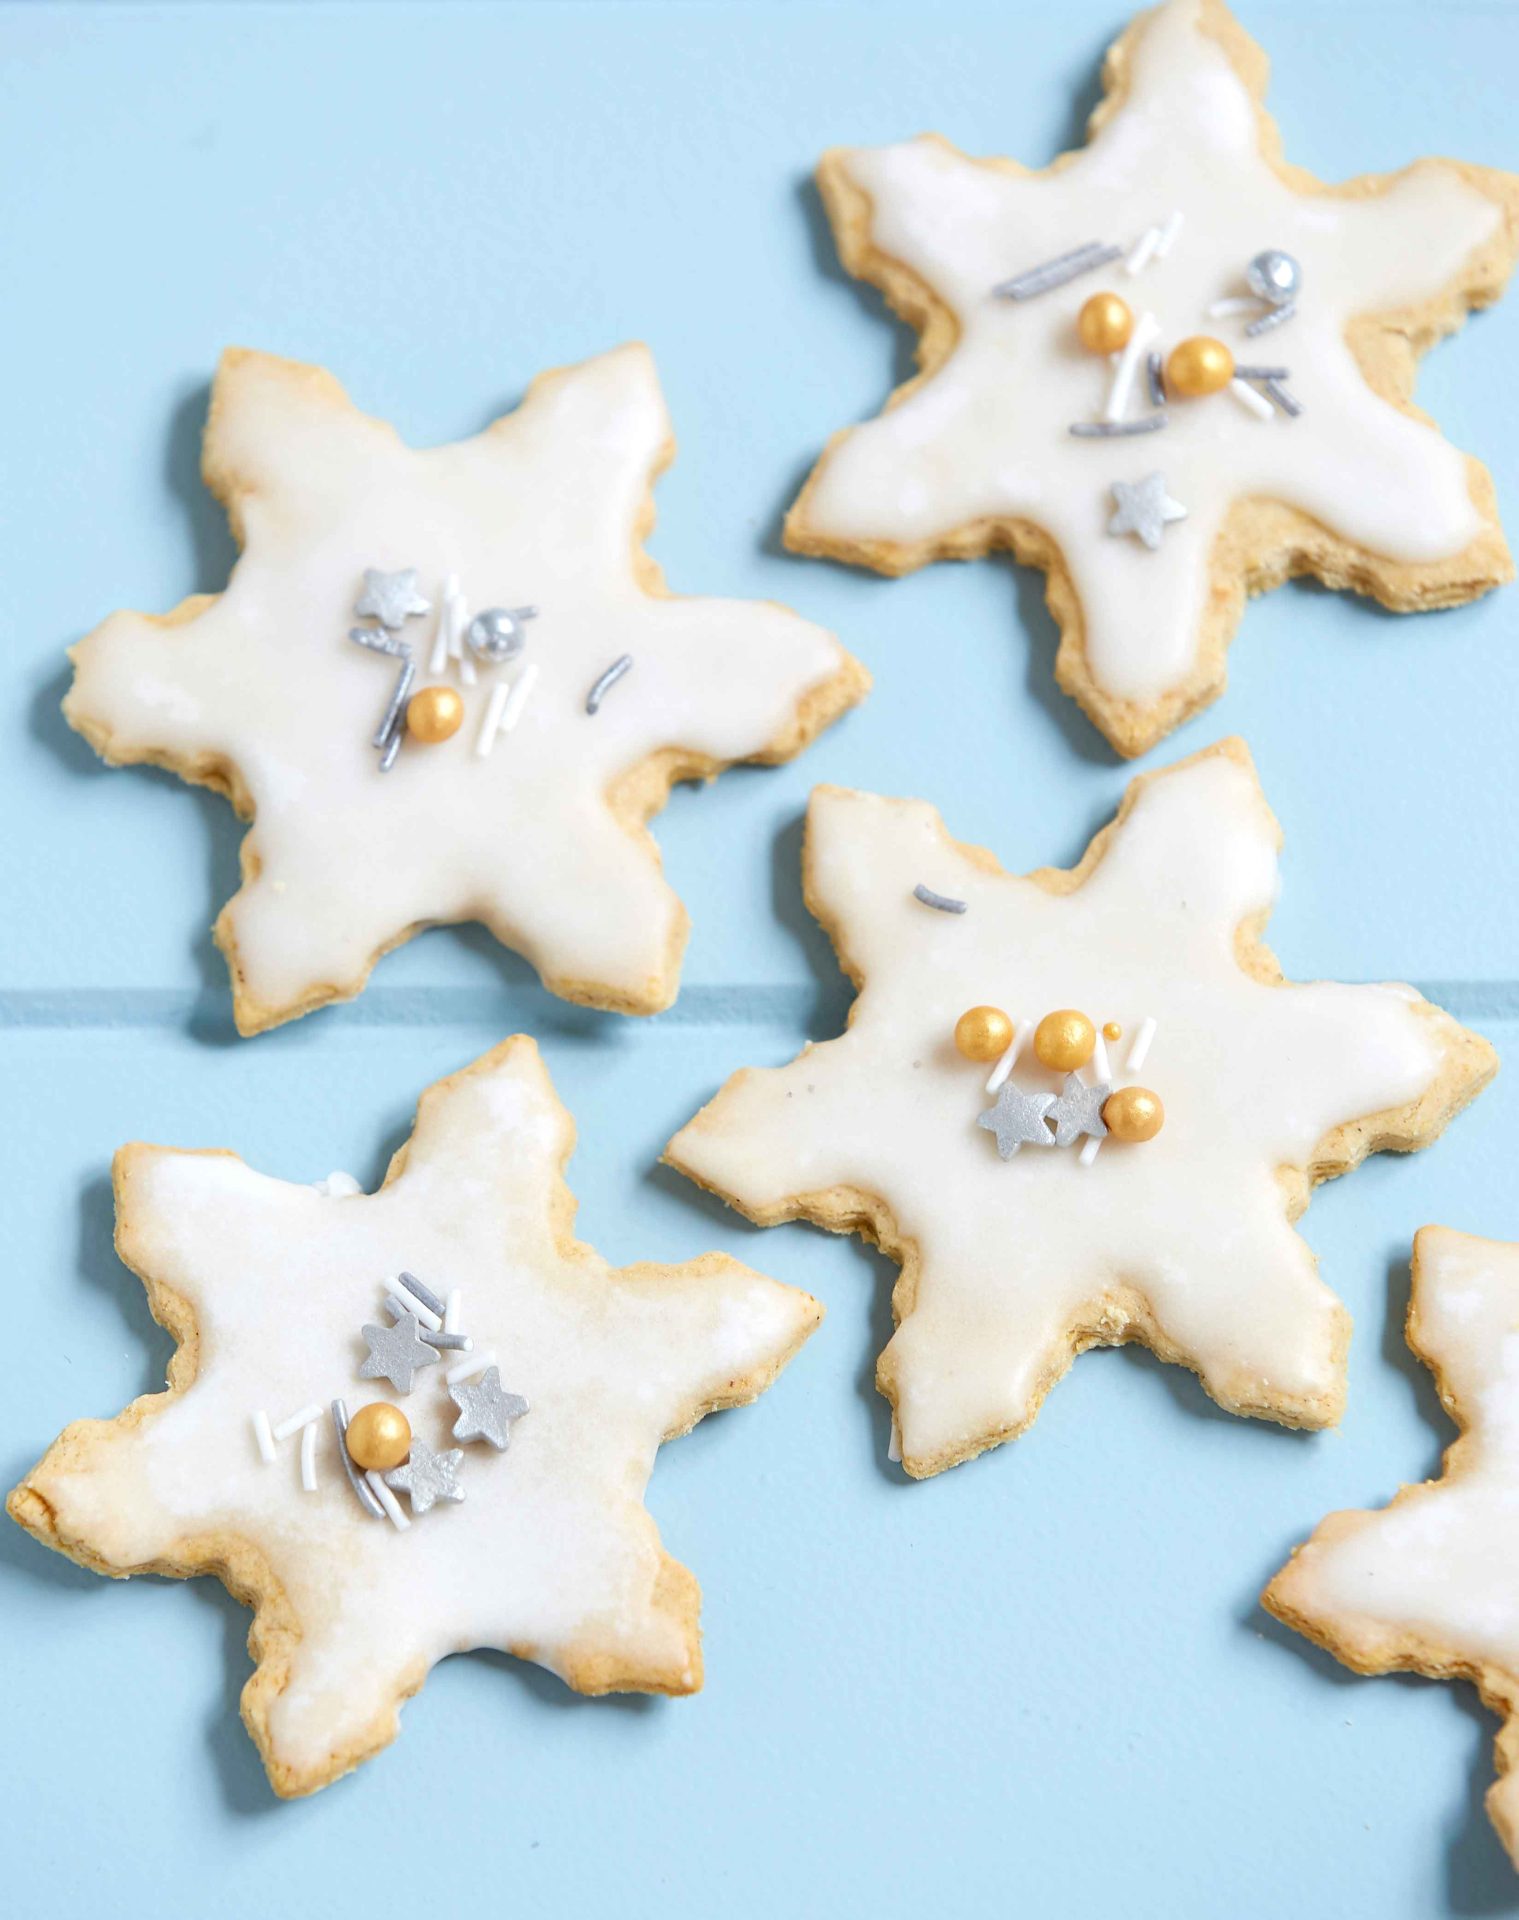 low FODMAP gingerbread snowflake cookies with white roayl icing and silver and gold sprinkles arranged on a pale blue wooden board.